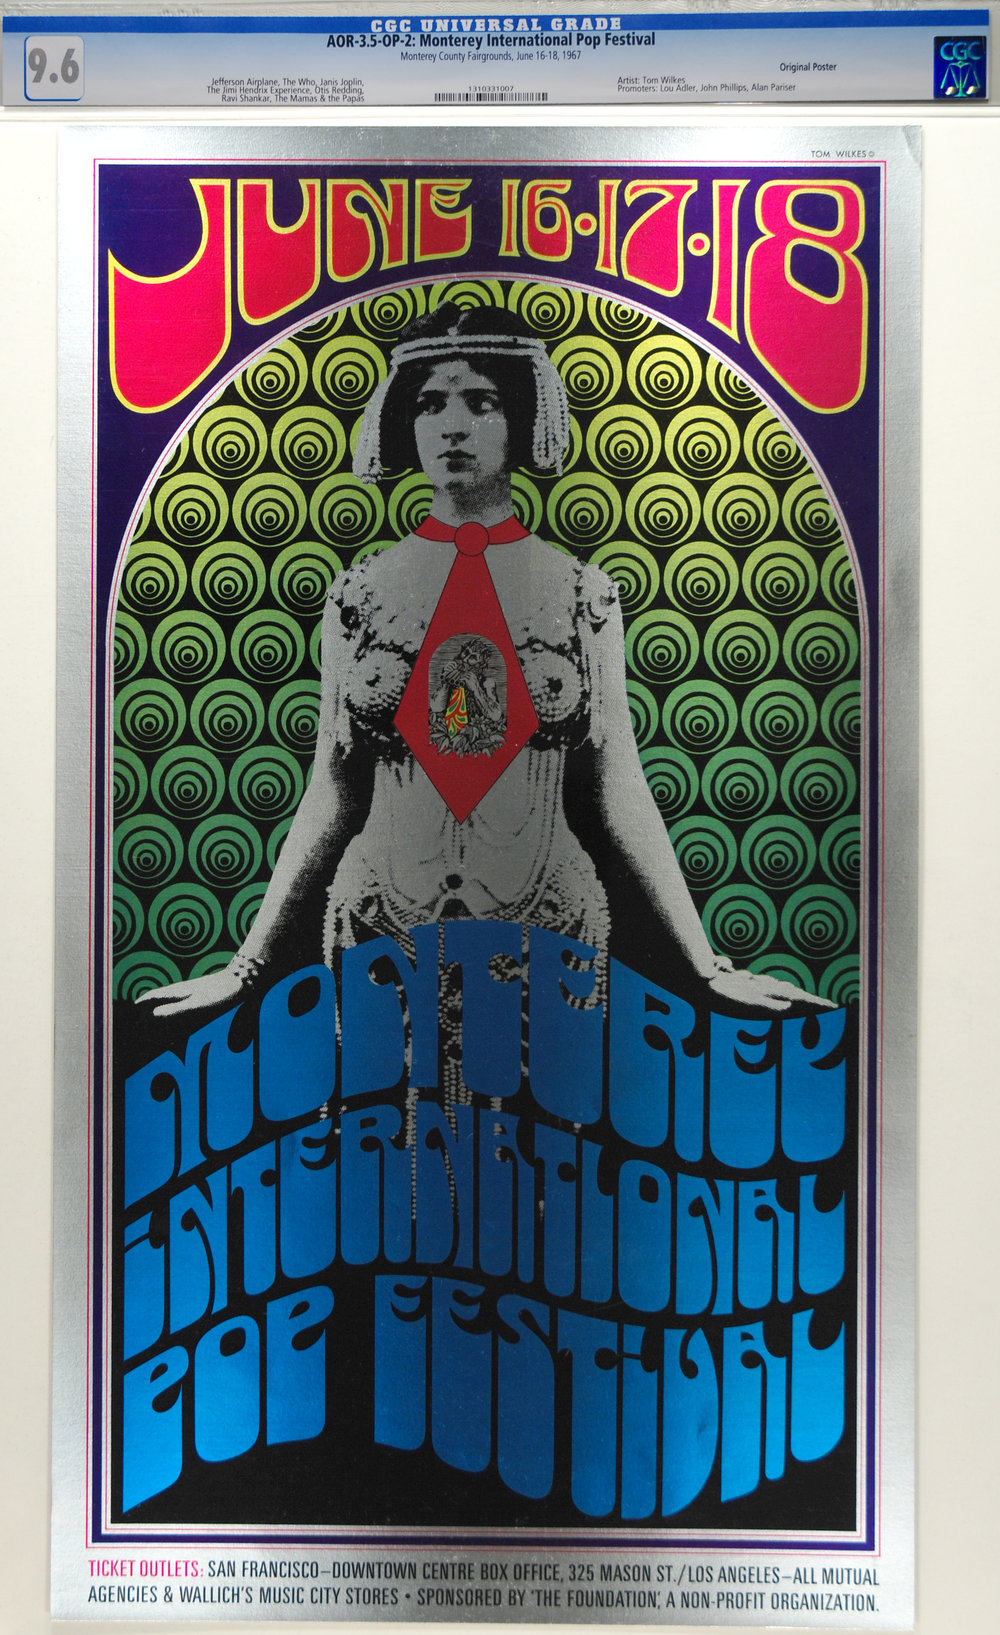 This beautiful Monterey International Pop Festival Concert poster CGC graded 9.6    sold for a record $4612 in our auction    2/17.